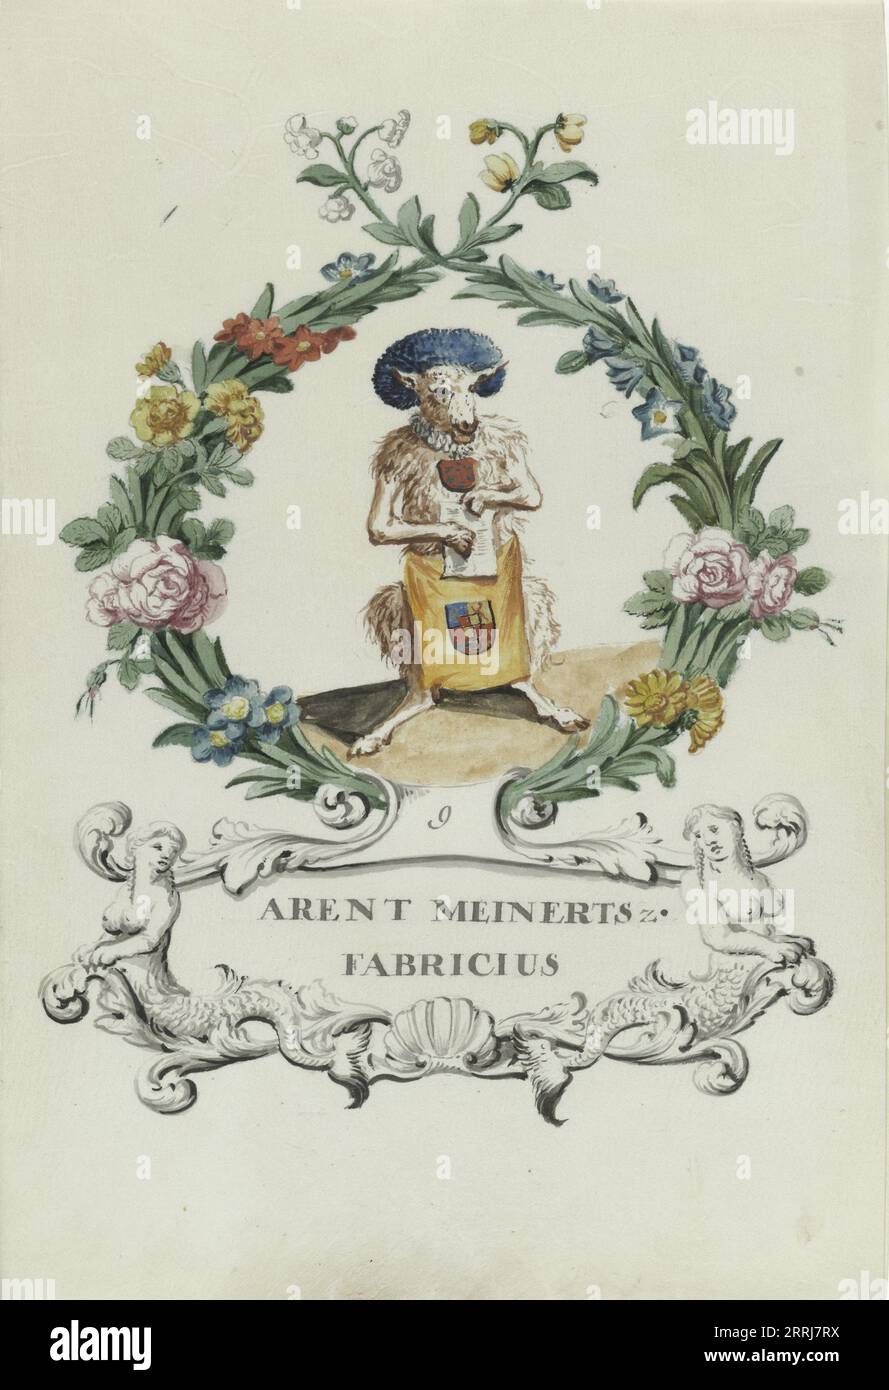 Cartoon of Arent Meinertsz. Fabricius, 1710-1720. Arent Meinertsz. Fabricius was a judge of Van Oldenbarnevelt; White sheep with blue fur hat and apron, in wreath of flowers and leaves. Cartouche with two mermaids on either side. Related to 1618-1619 Trial of Oldenbarnevelt, Grotius and Hogerbeets for treason. Stock Photo